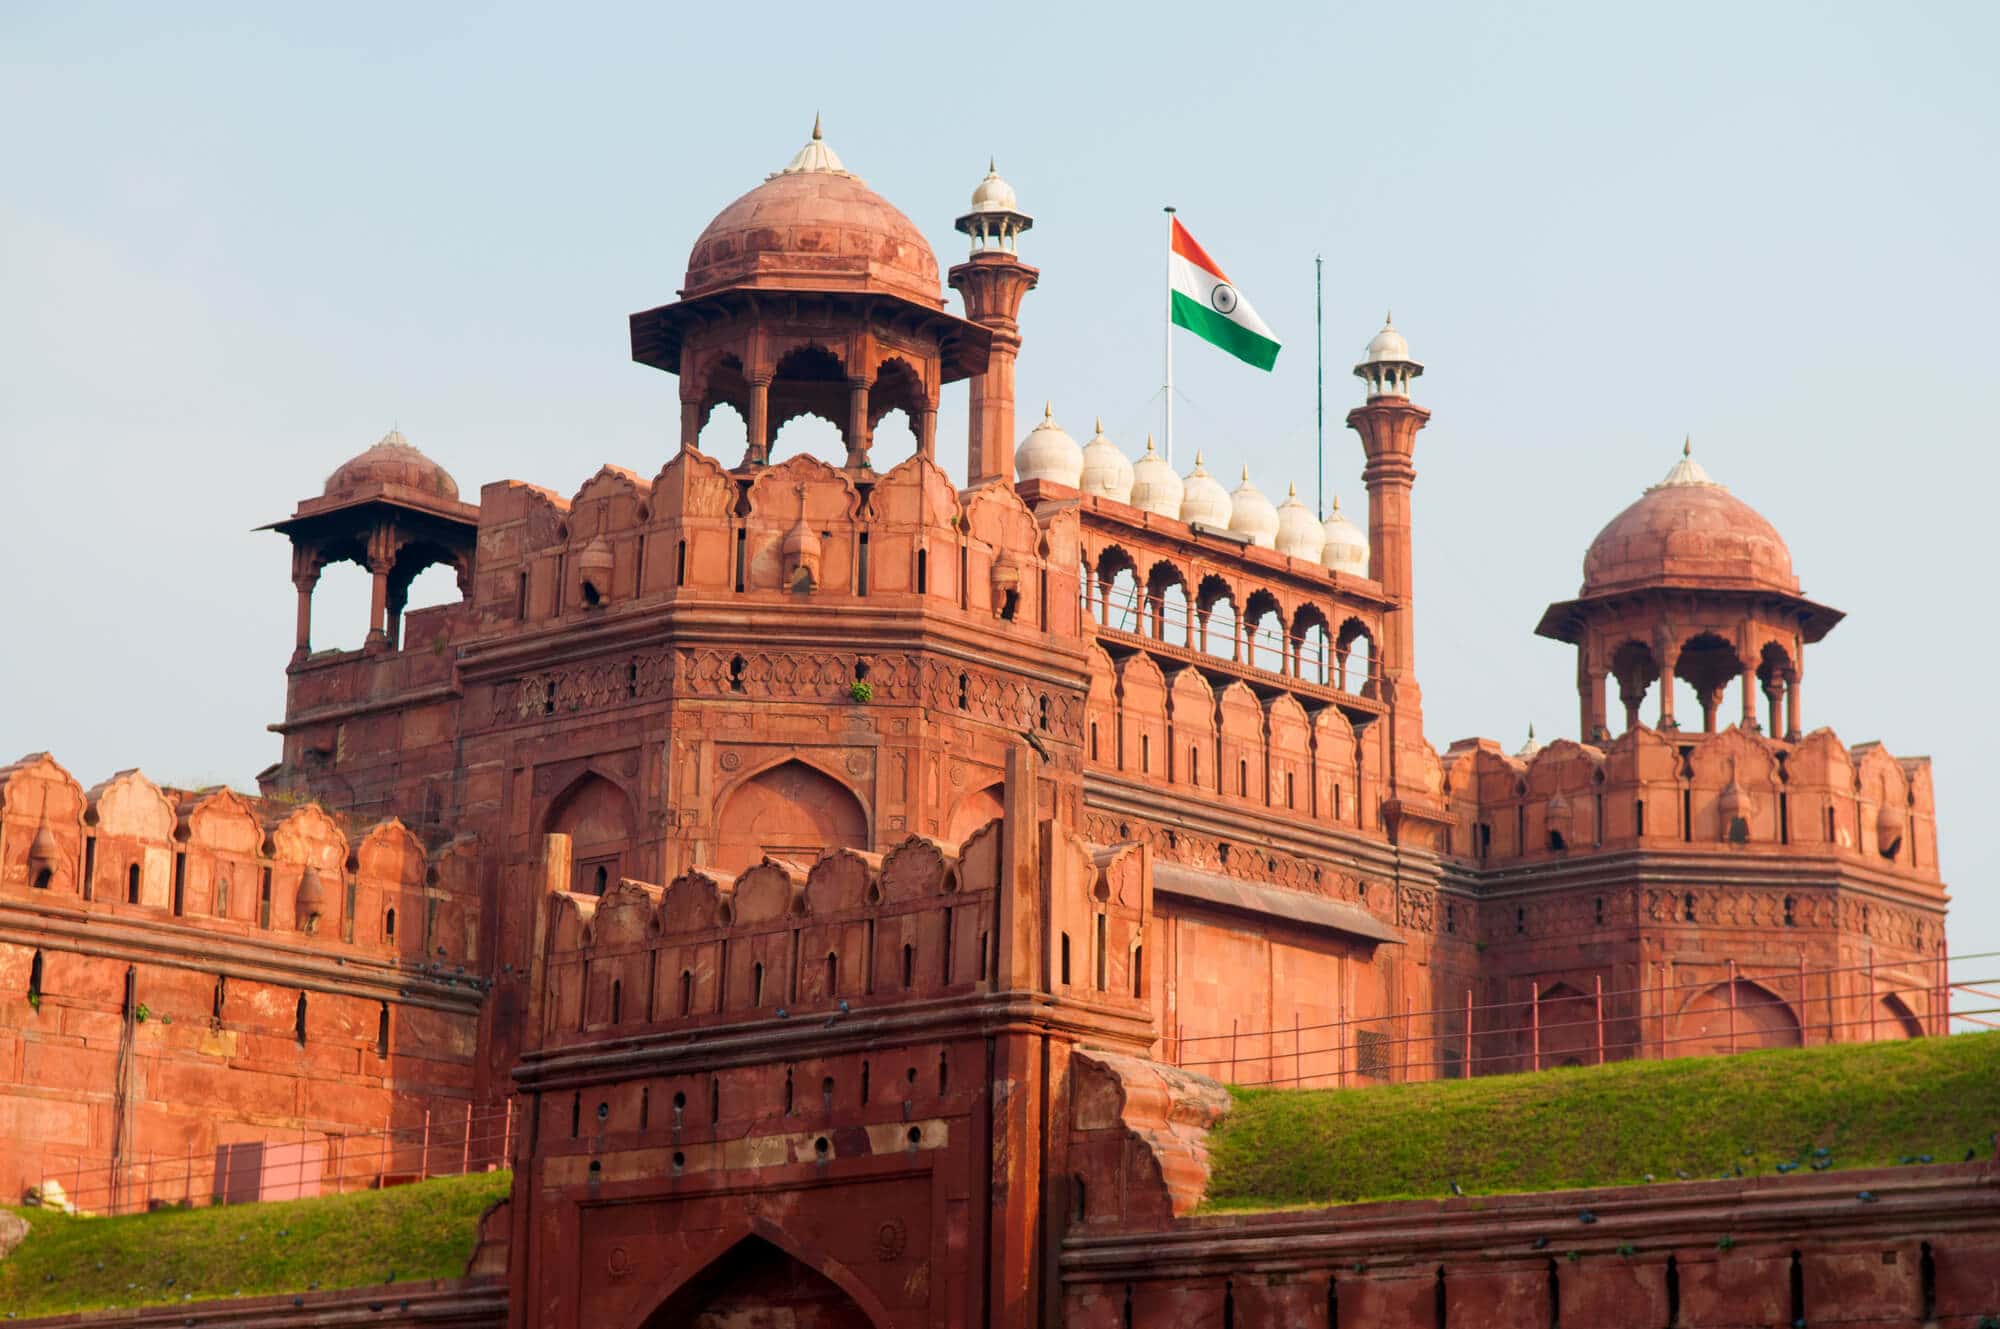 The ultimate 2 day New Delhi itinerary - The Red Fort 